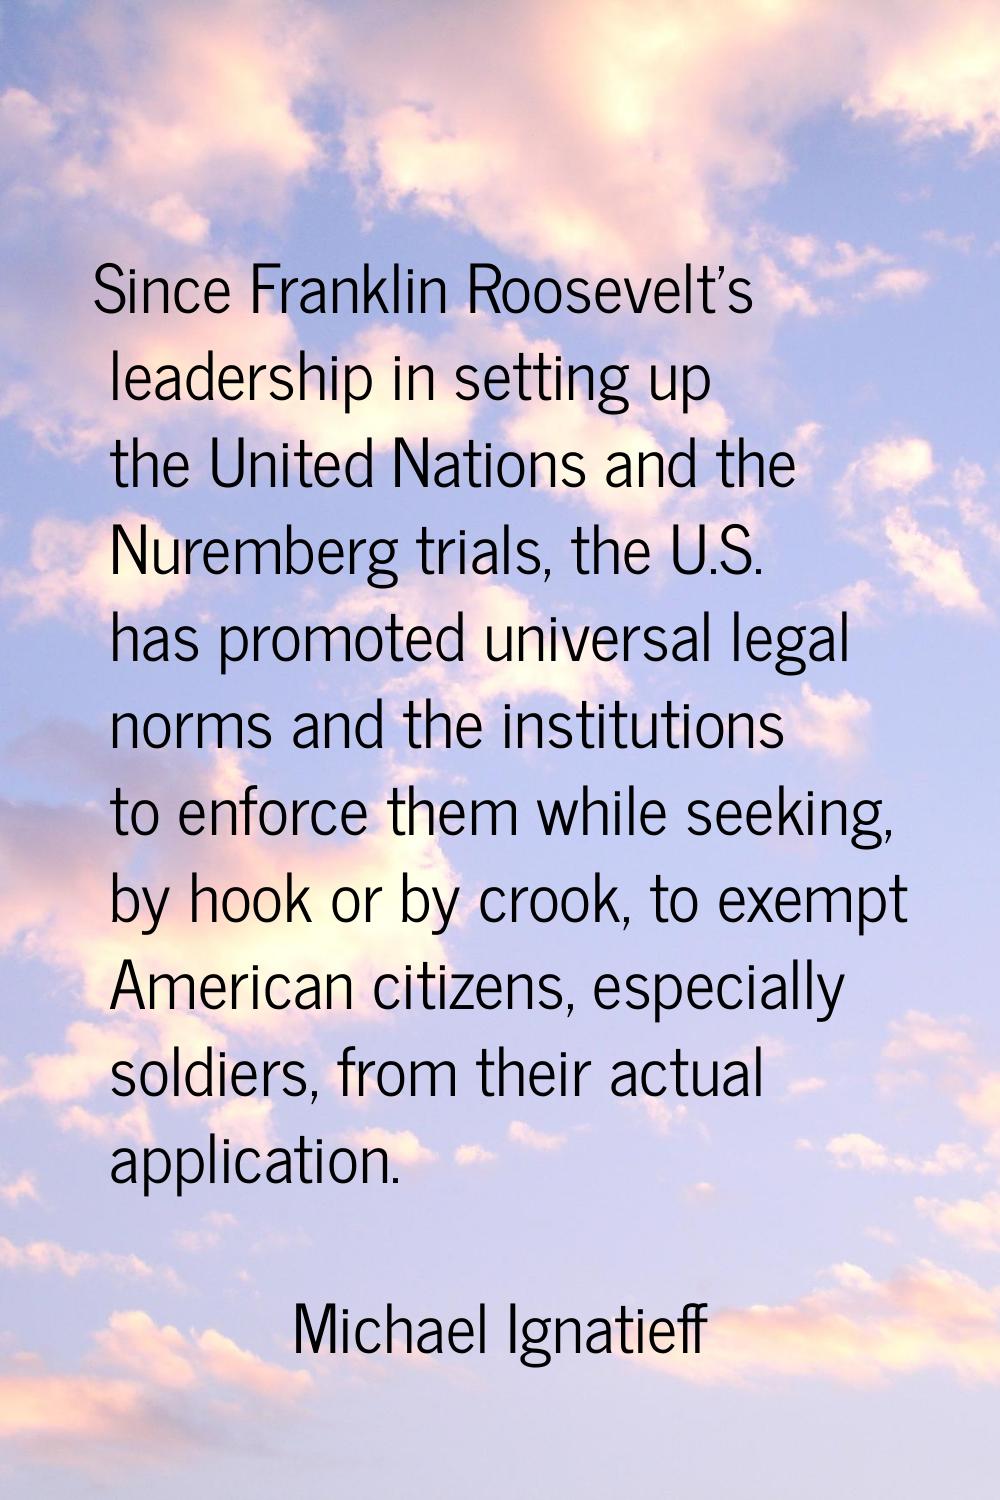 Since Franklin Roosevelt's leadership in setting up the United Nations and the Nuremberg trials, th